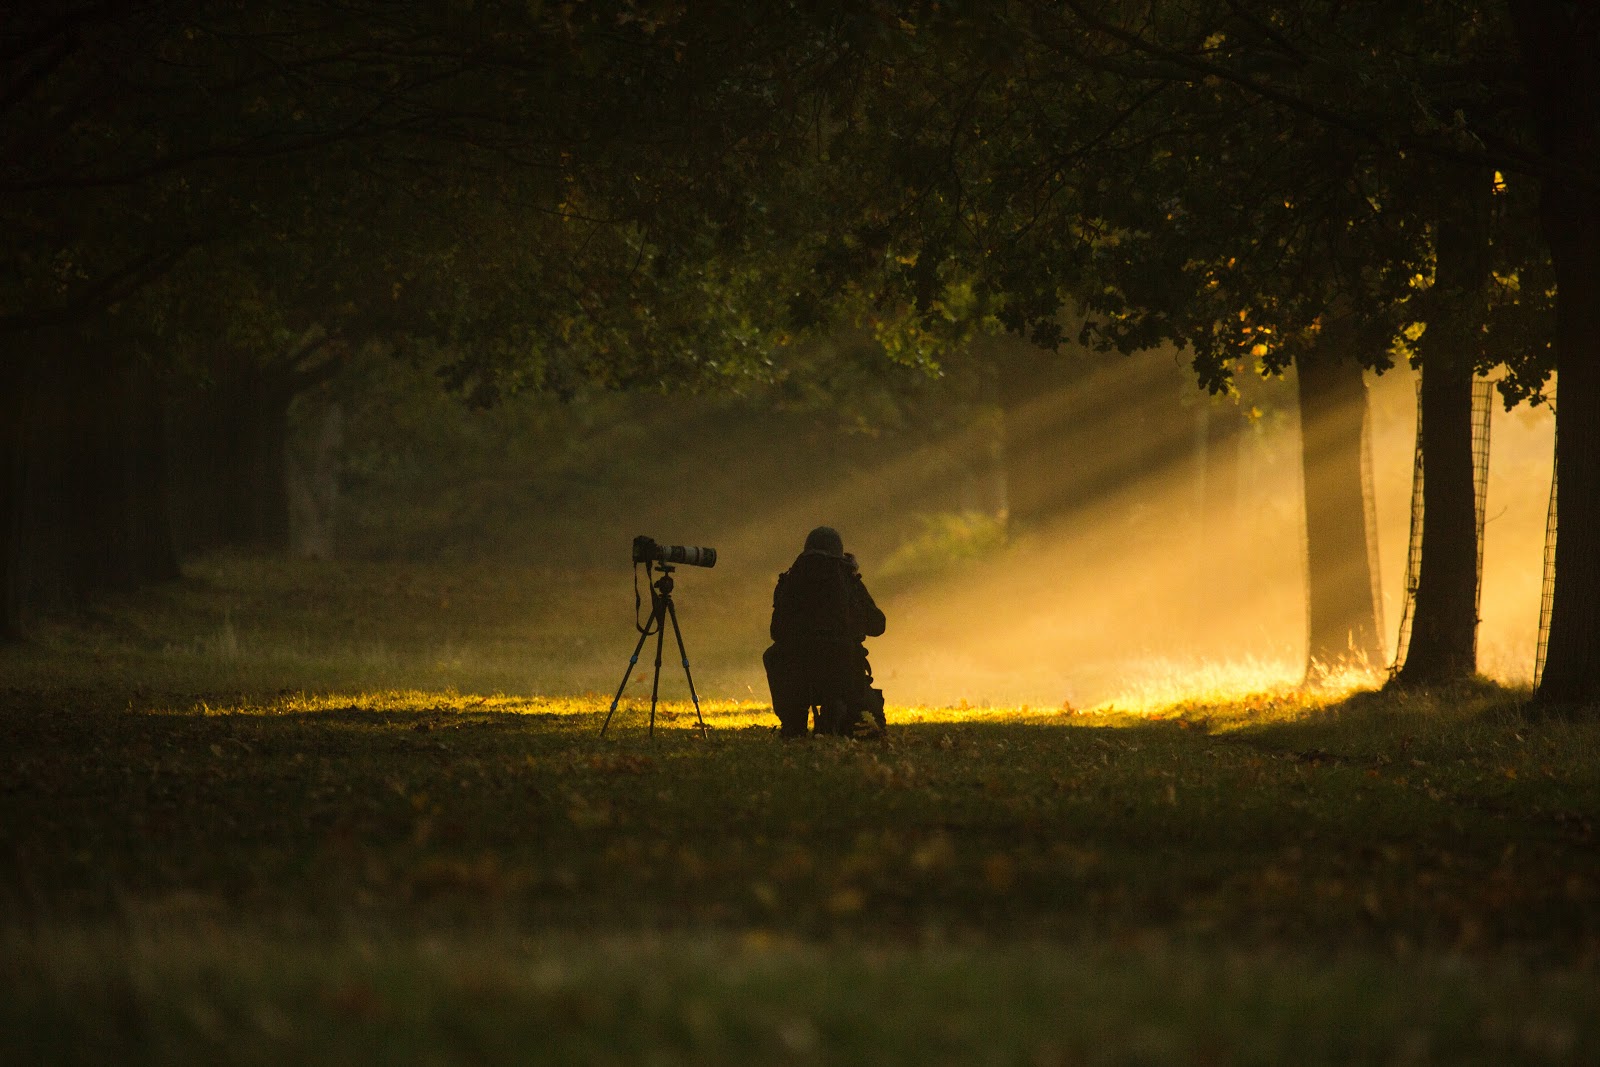 photographer crouched next to a camera on a tripod in the dark woods